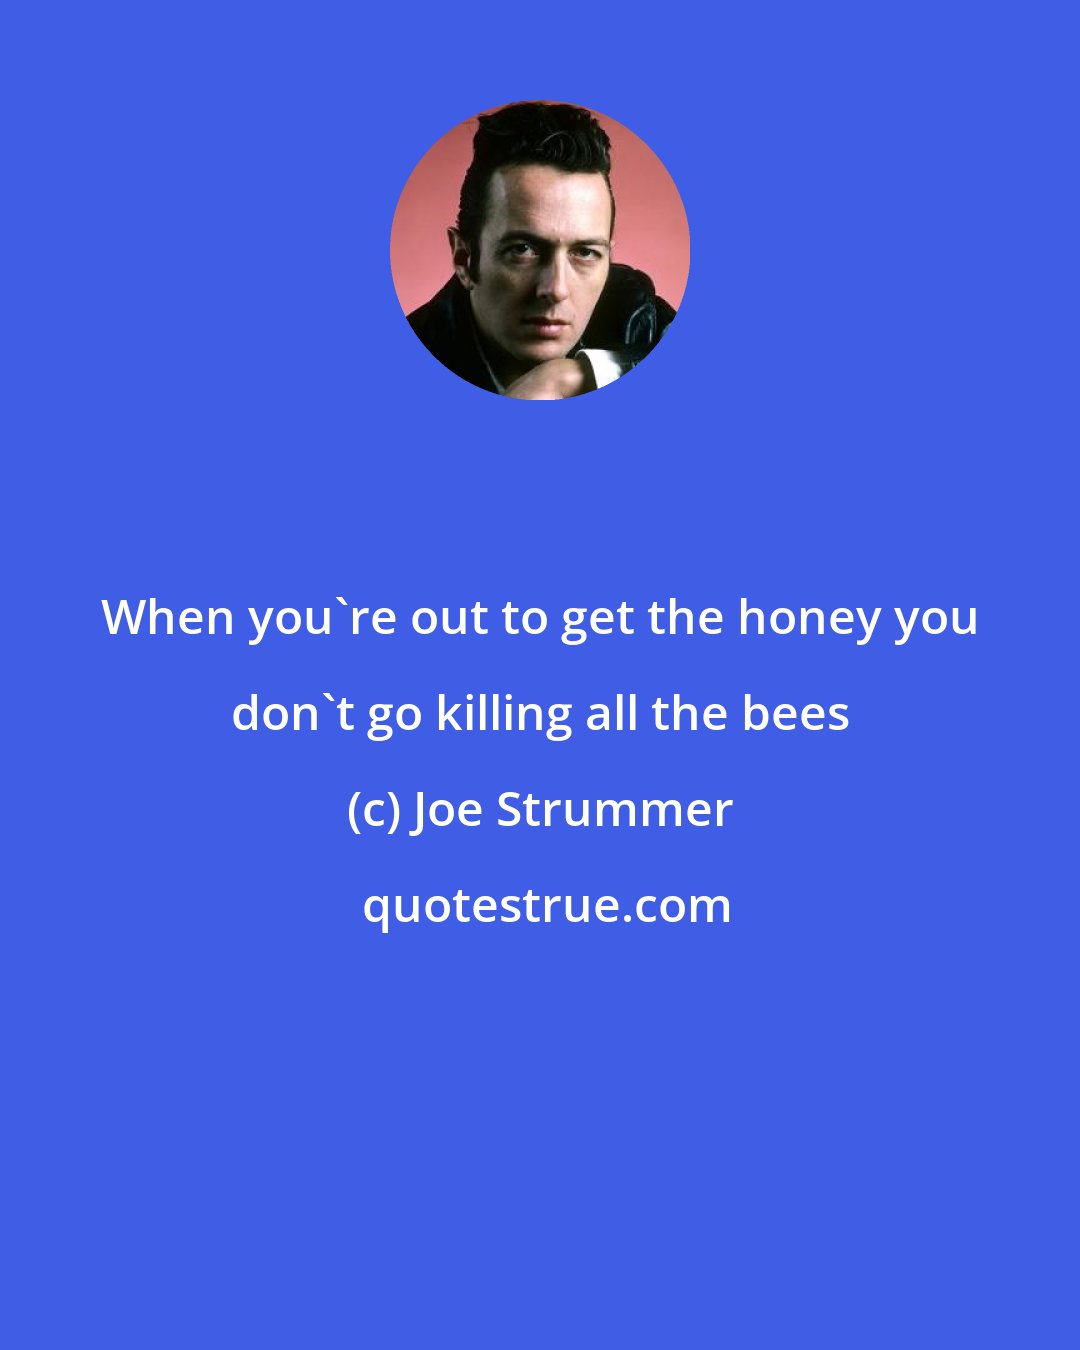 Joe Strummer: When you're out to get the honey you don't go killing all the bees